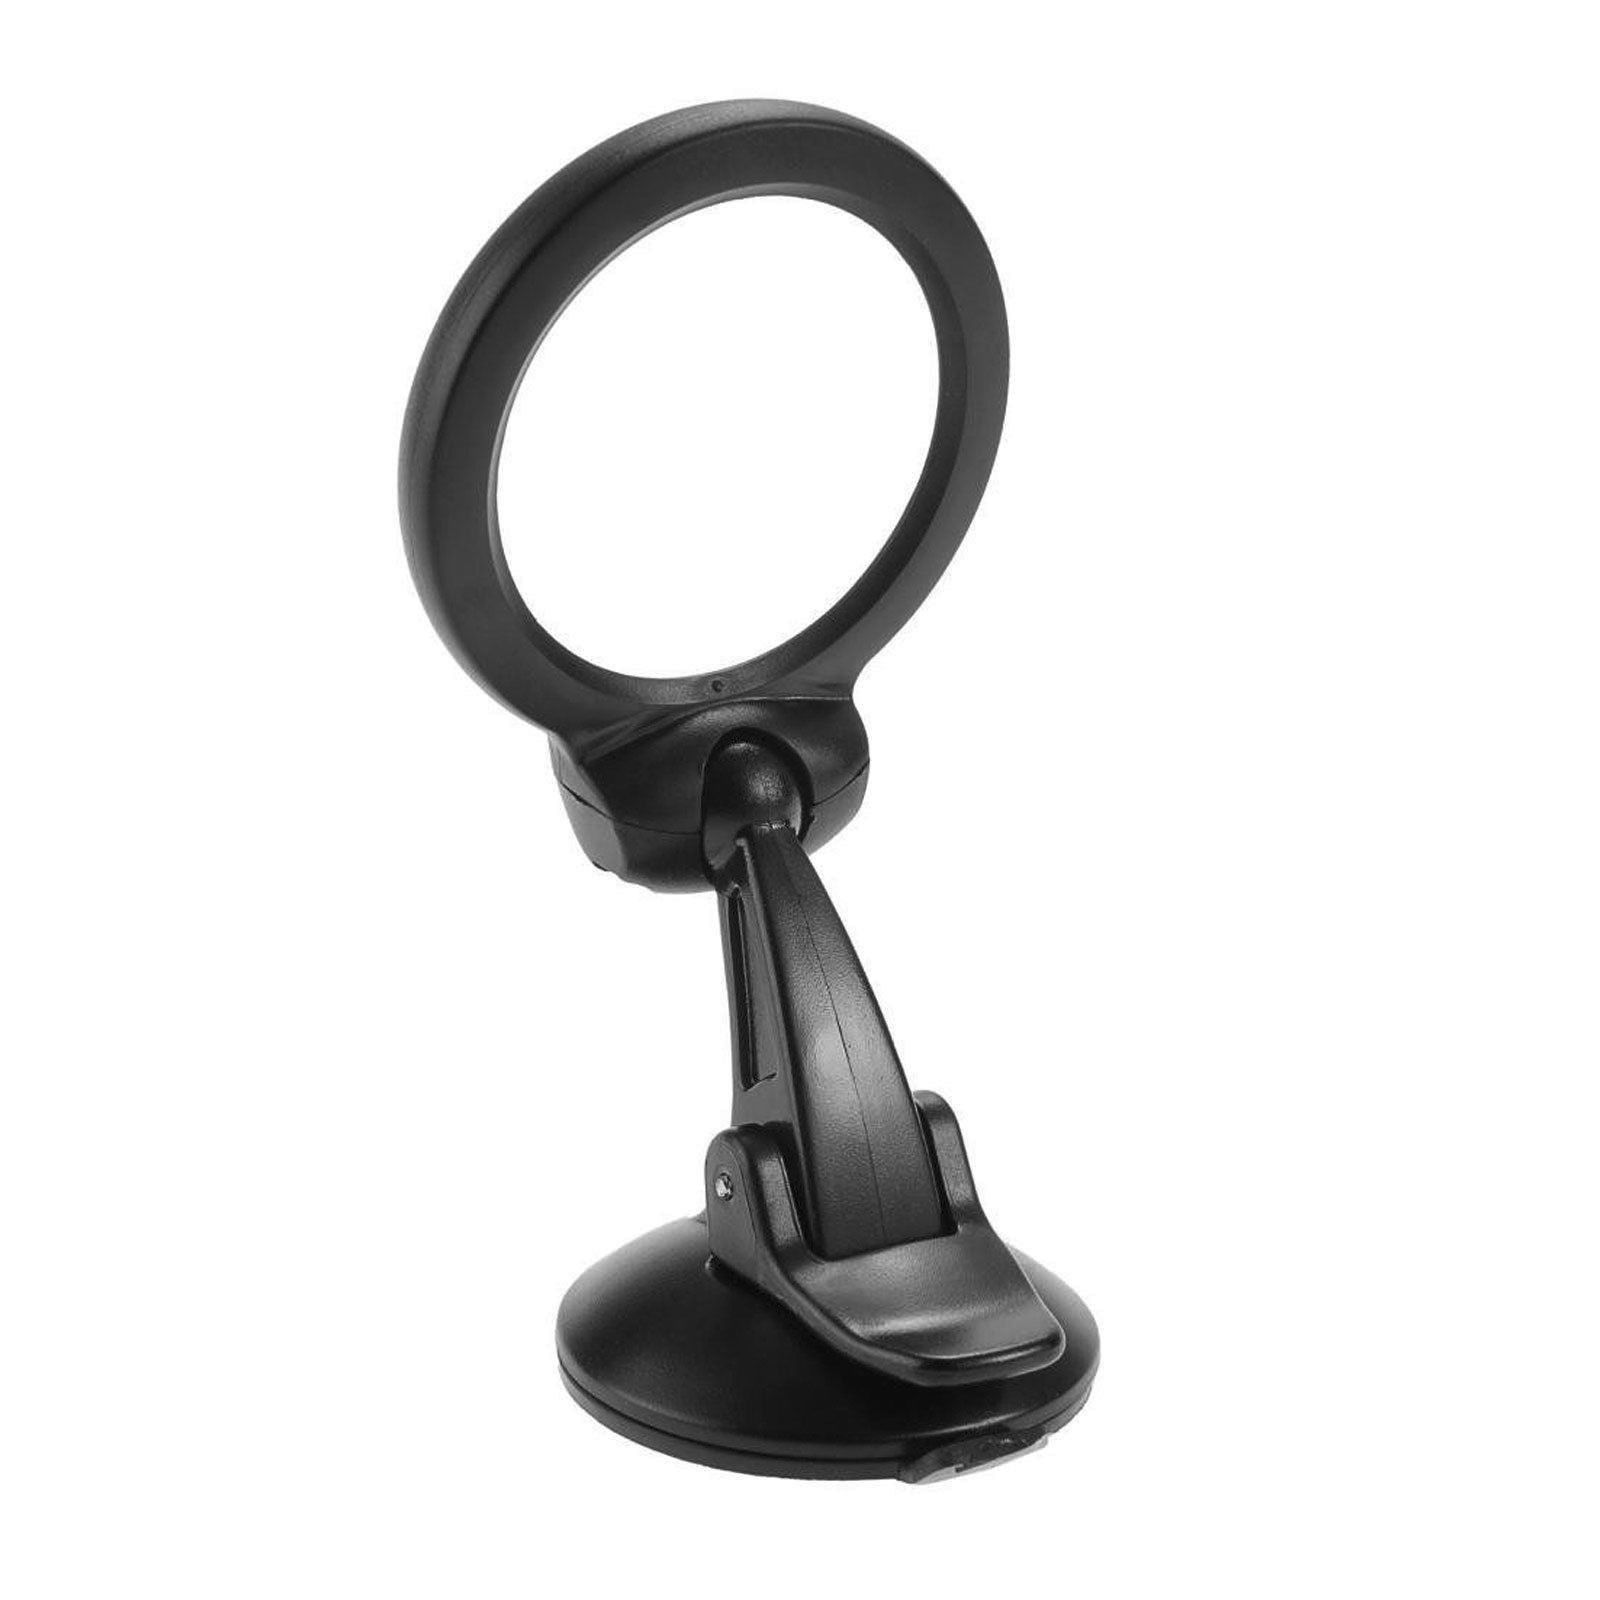 Car Windshield Mount Suction Cup Holder for Tomtom GPS ONE V2 V4 XL XXL ...